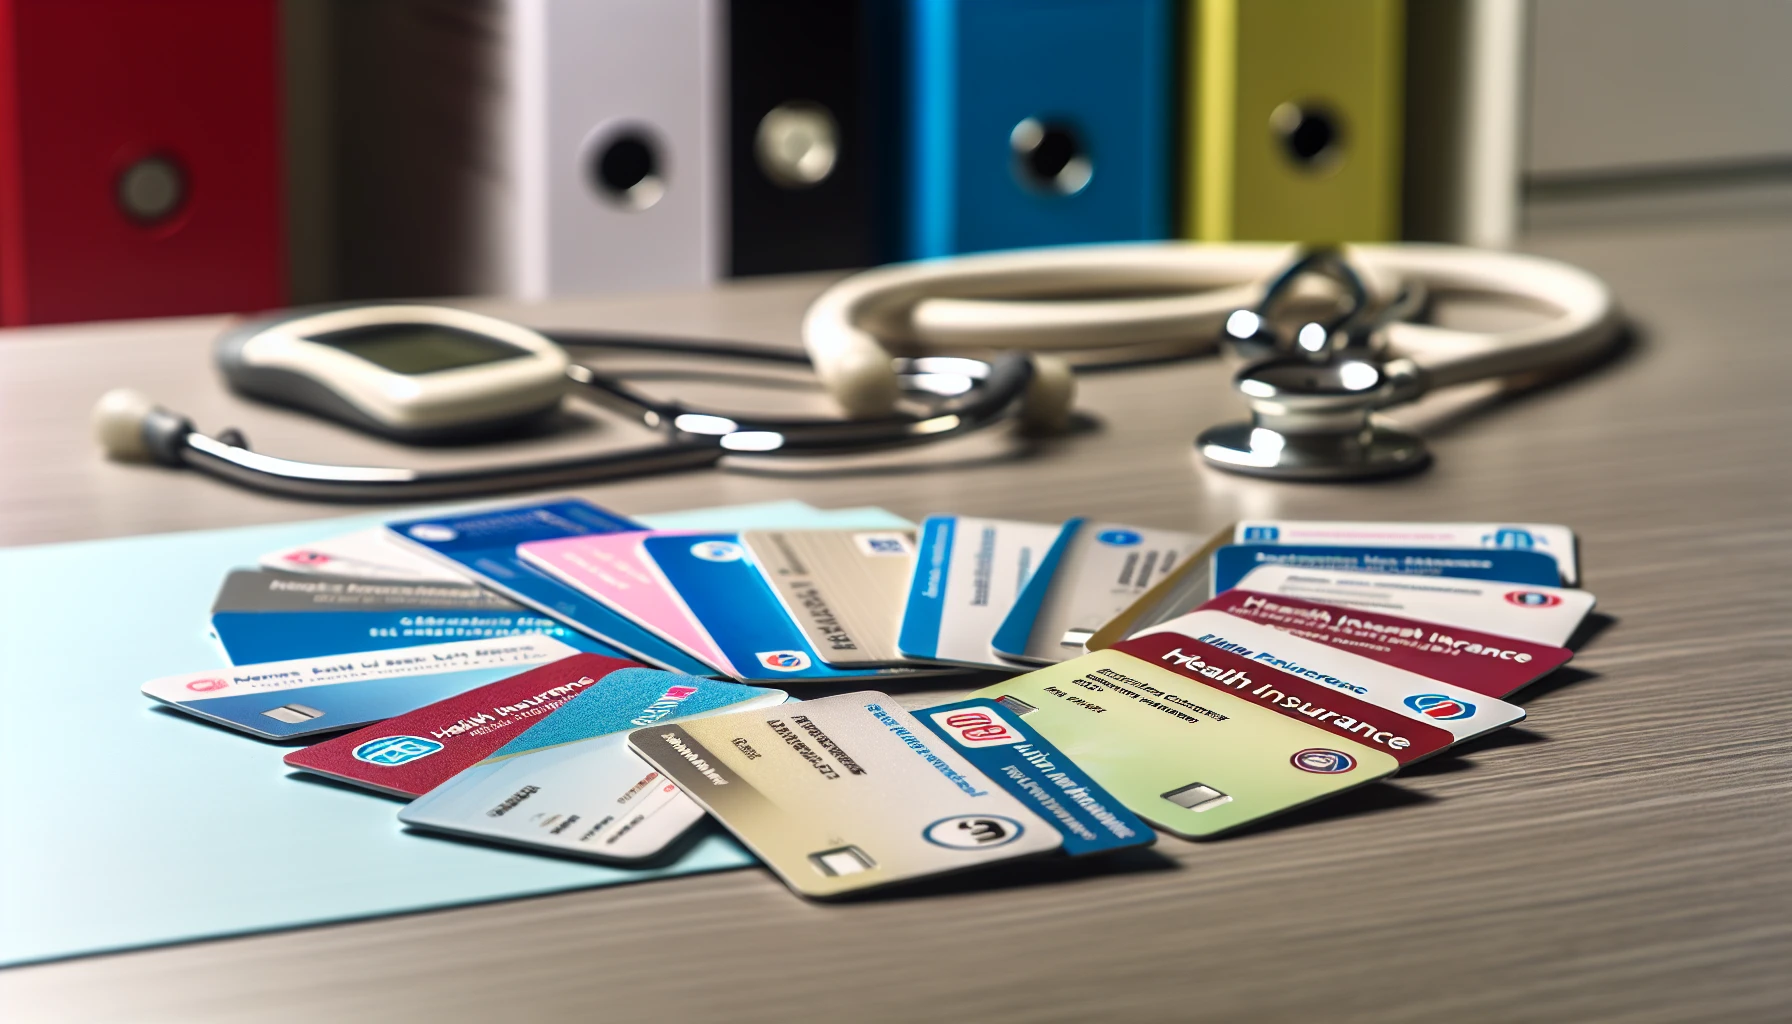 Health insurance cards with medical equipment in the background